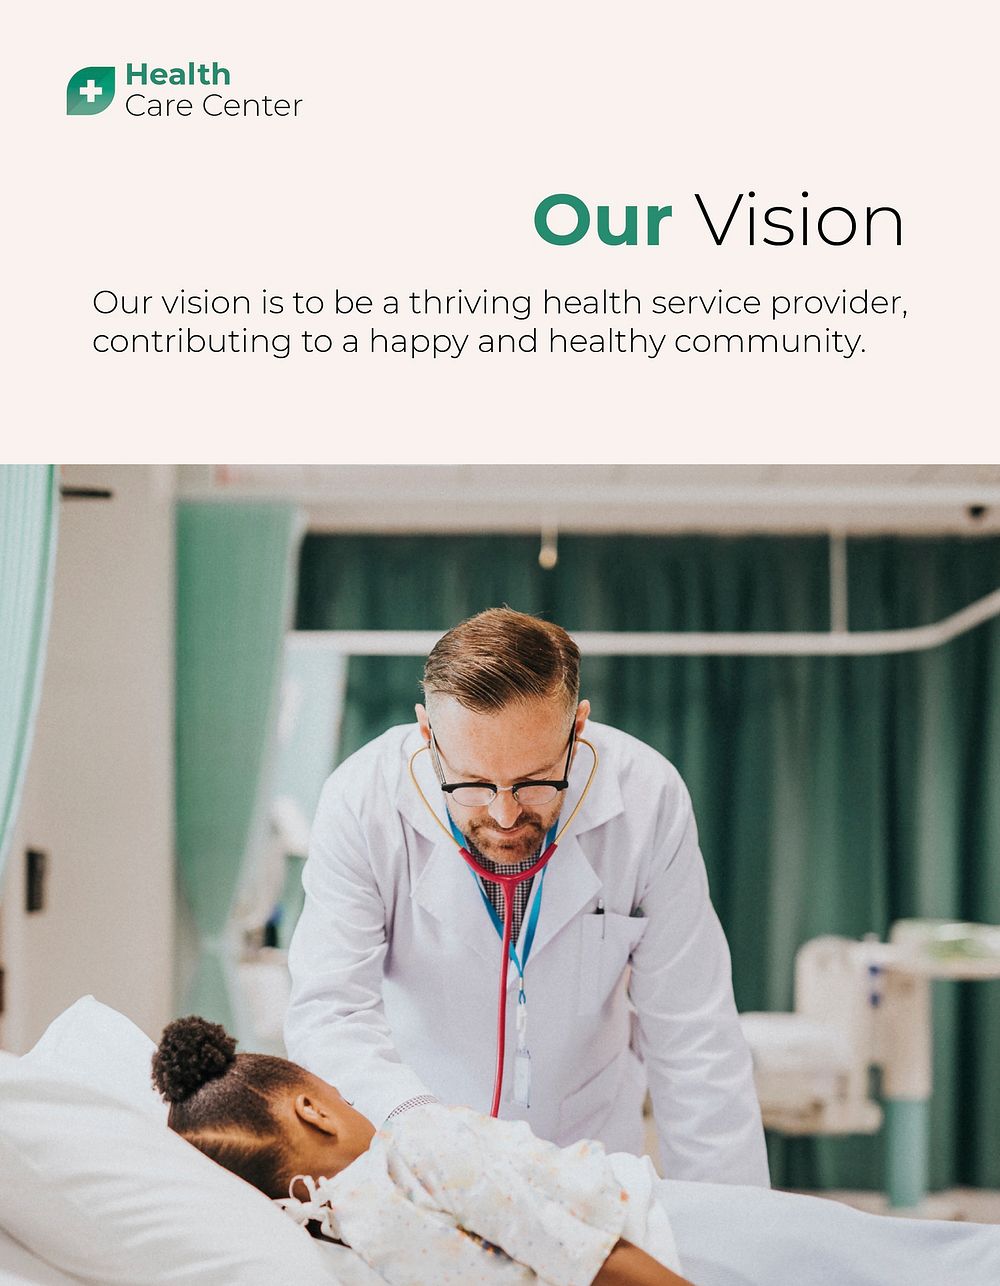 Company vision flyer template, medical business psd